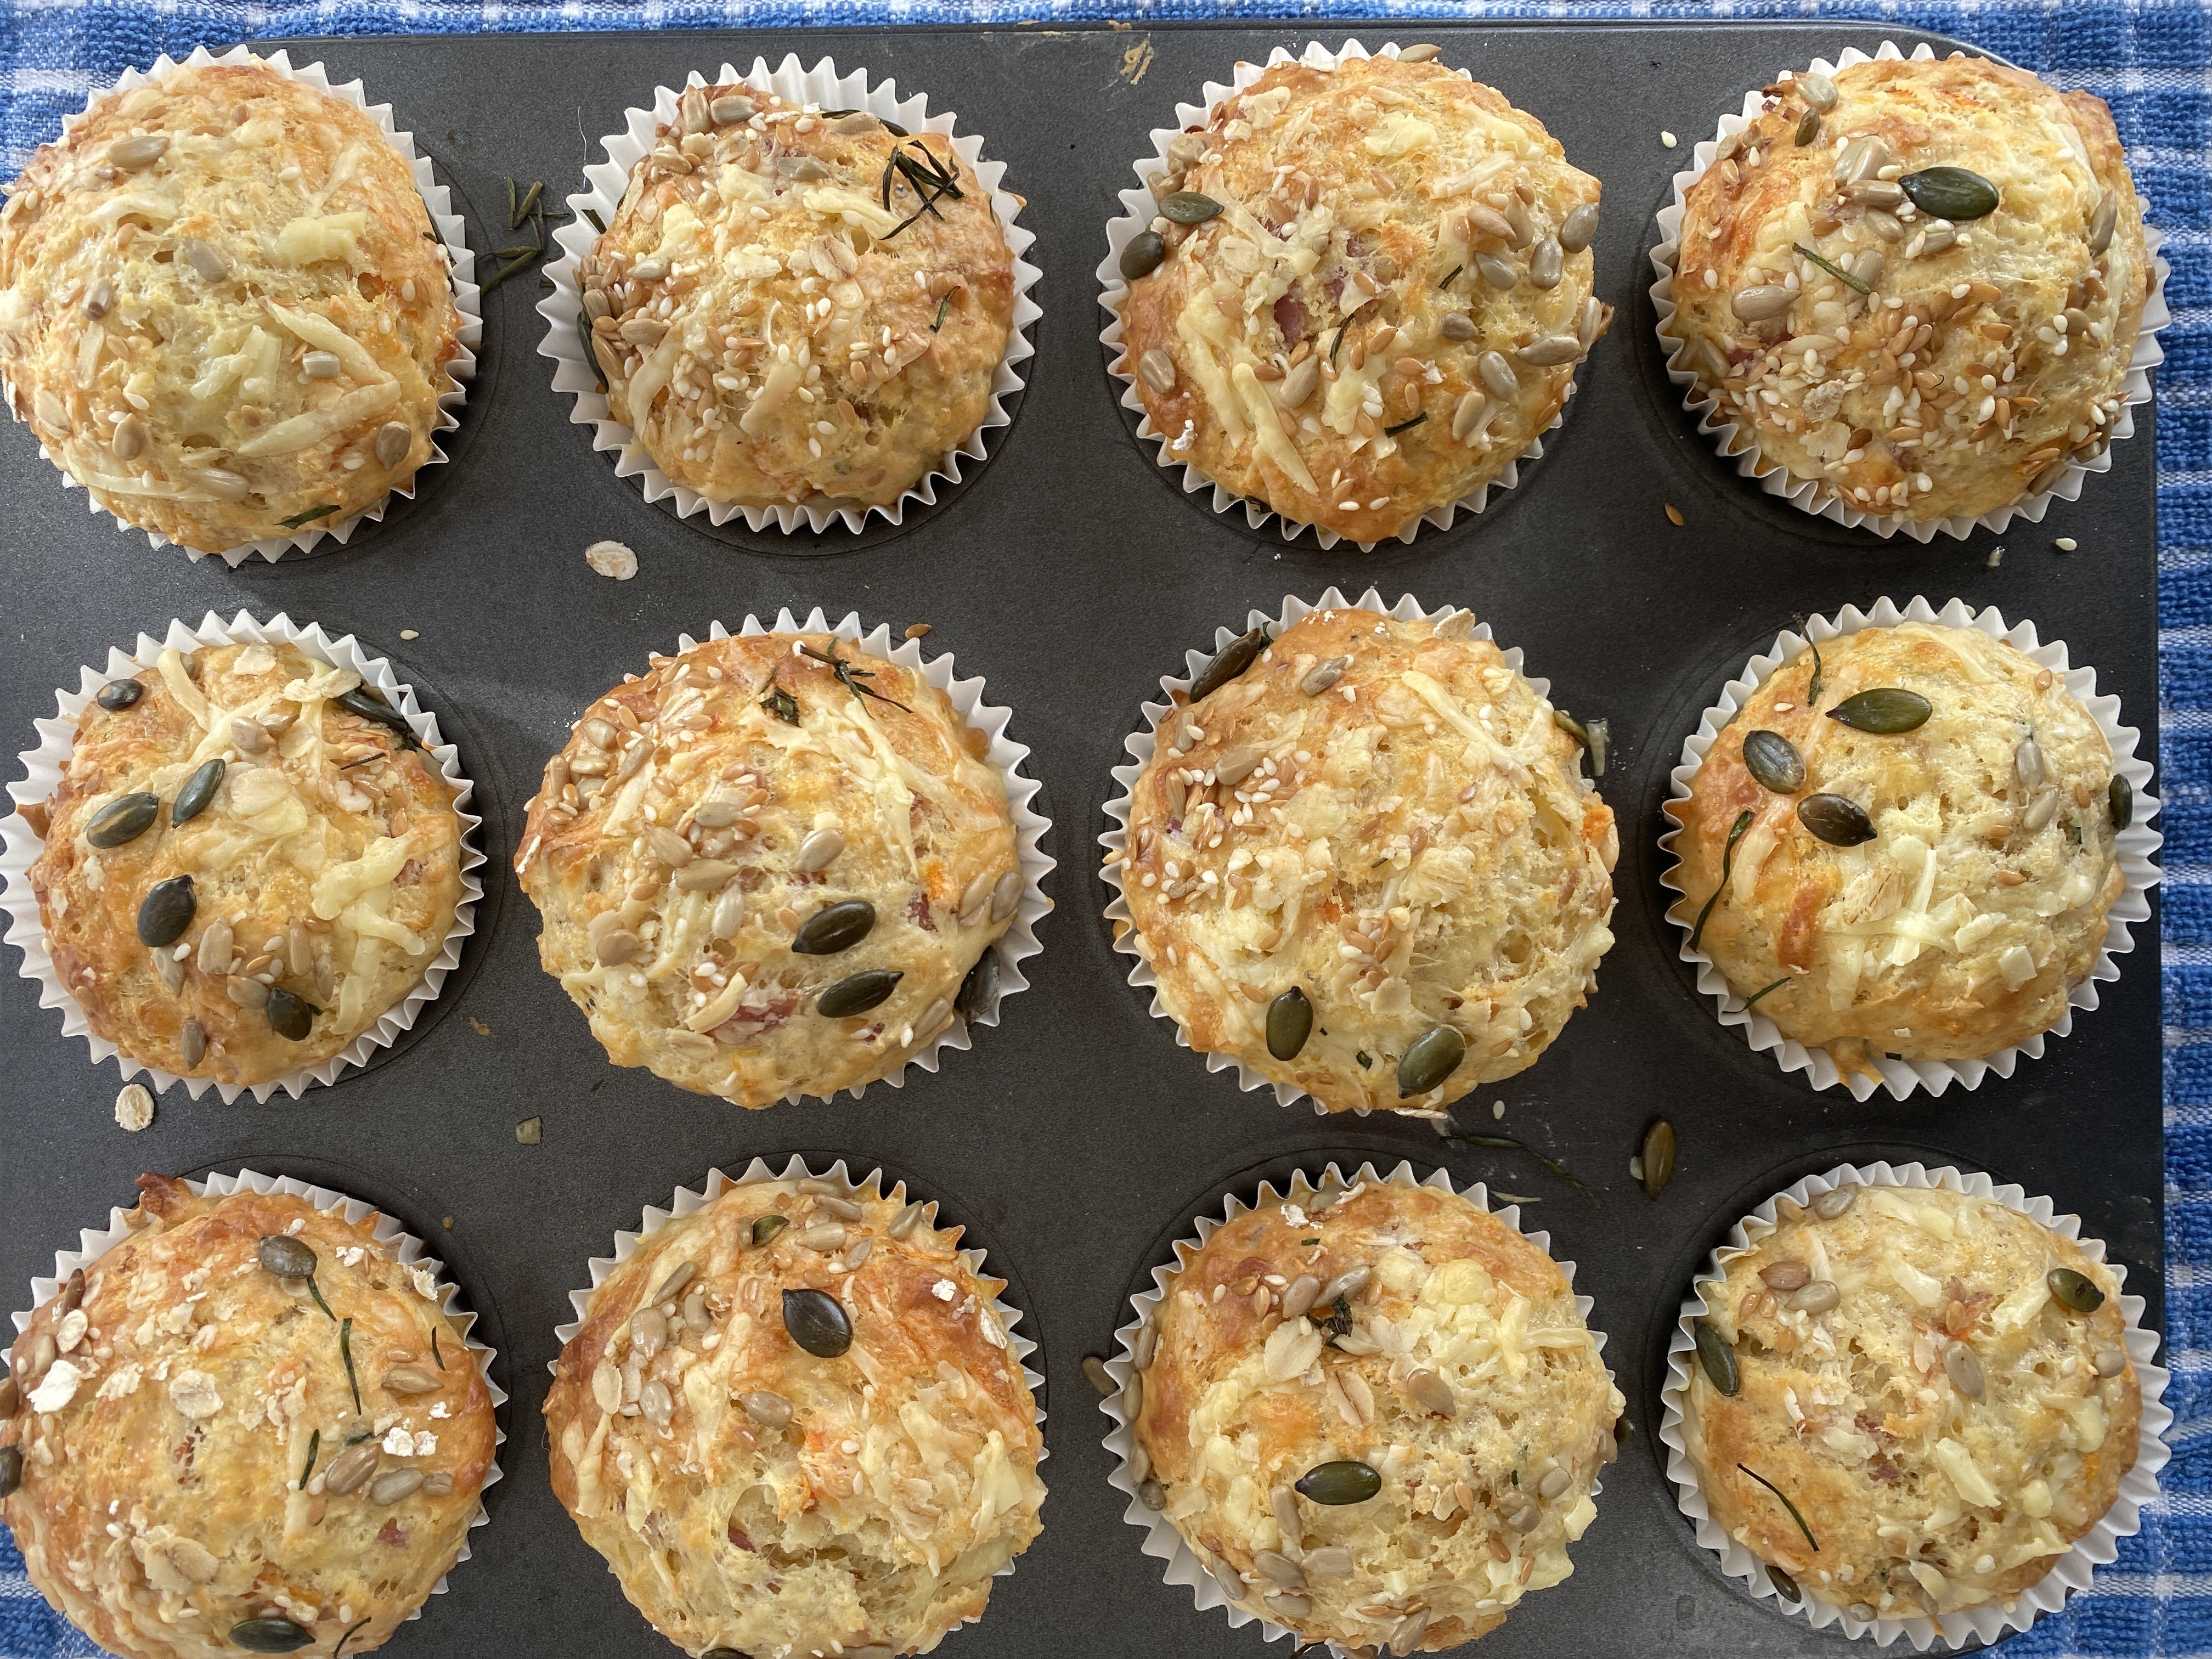 An image of golden brown breakfast muffins